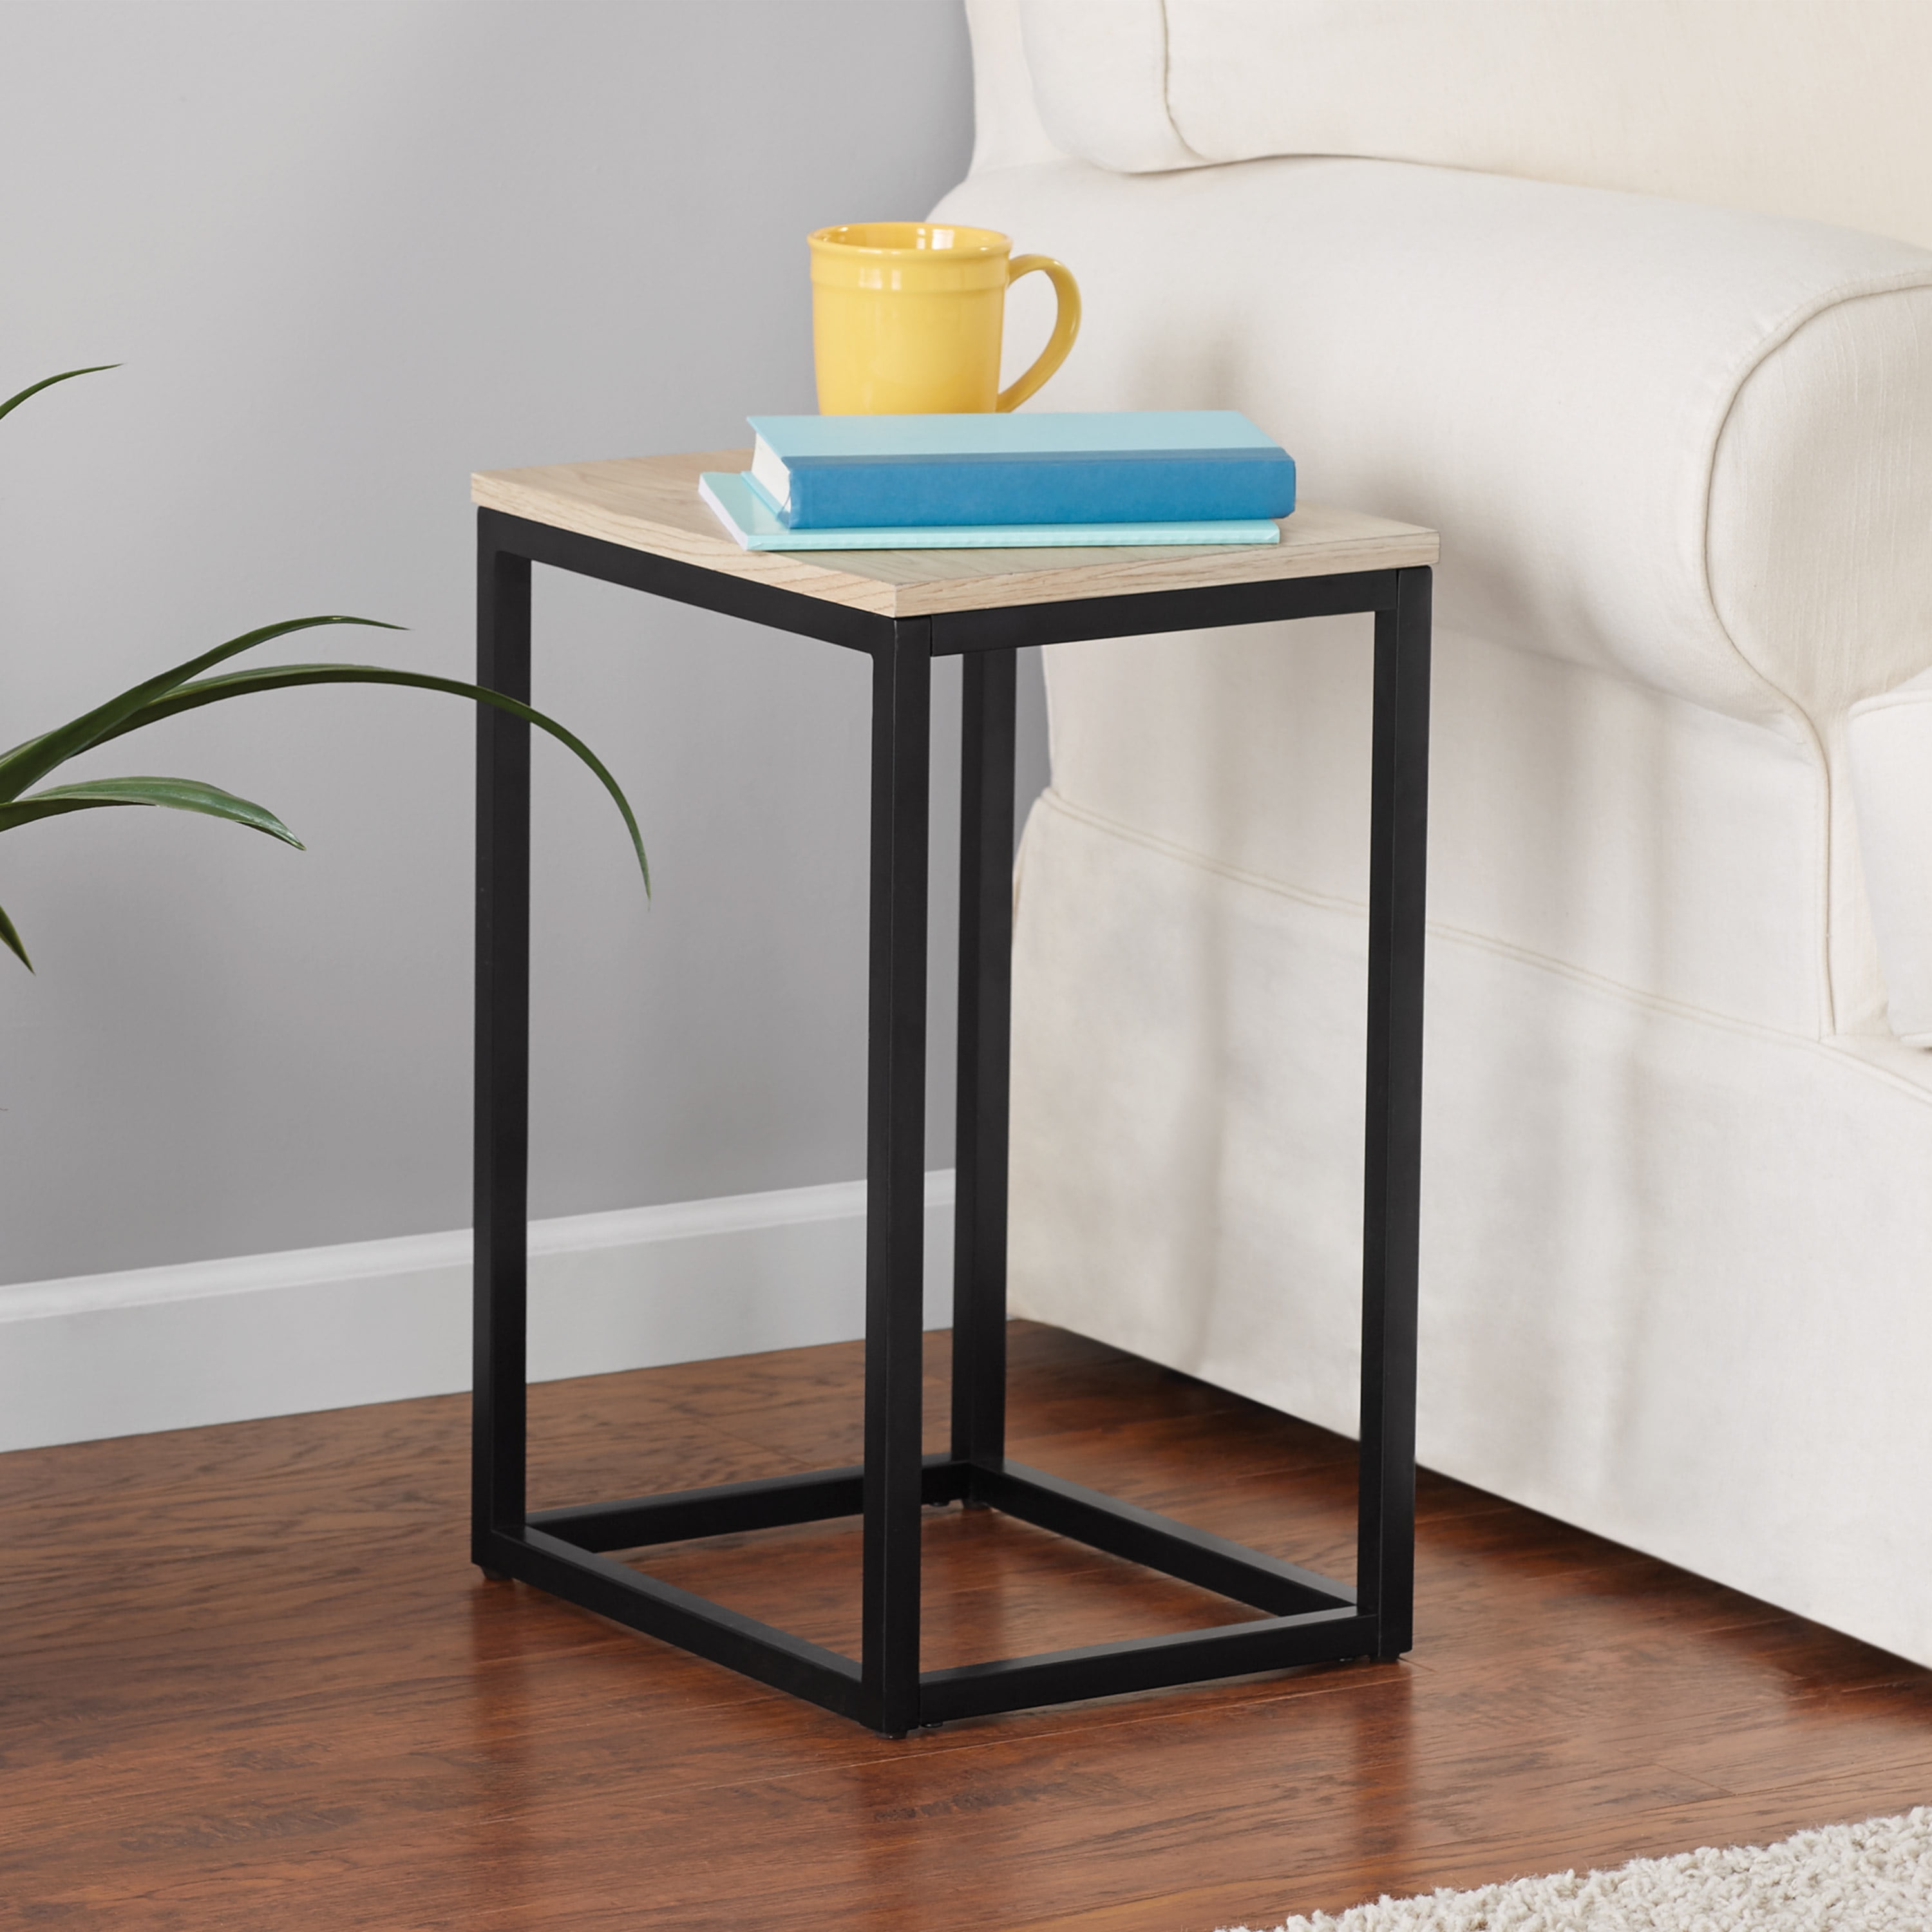 Mainstays Rectangle End Table (Natural Finish Top with Black Frame) $16.75  + Free S&H w/ Walmart+ or $35+